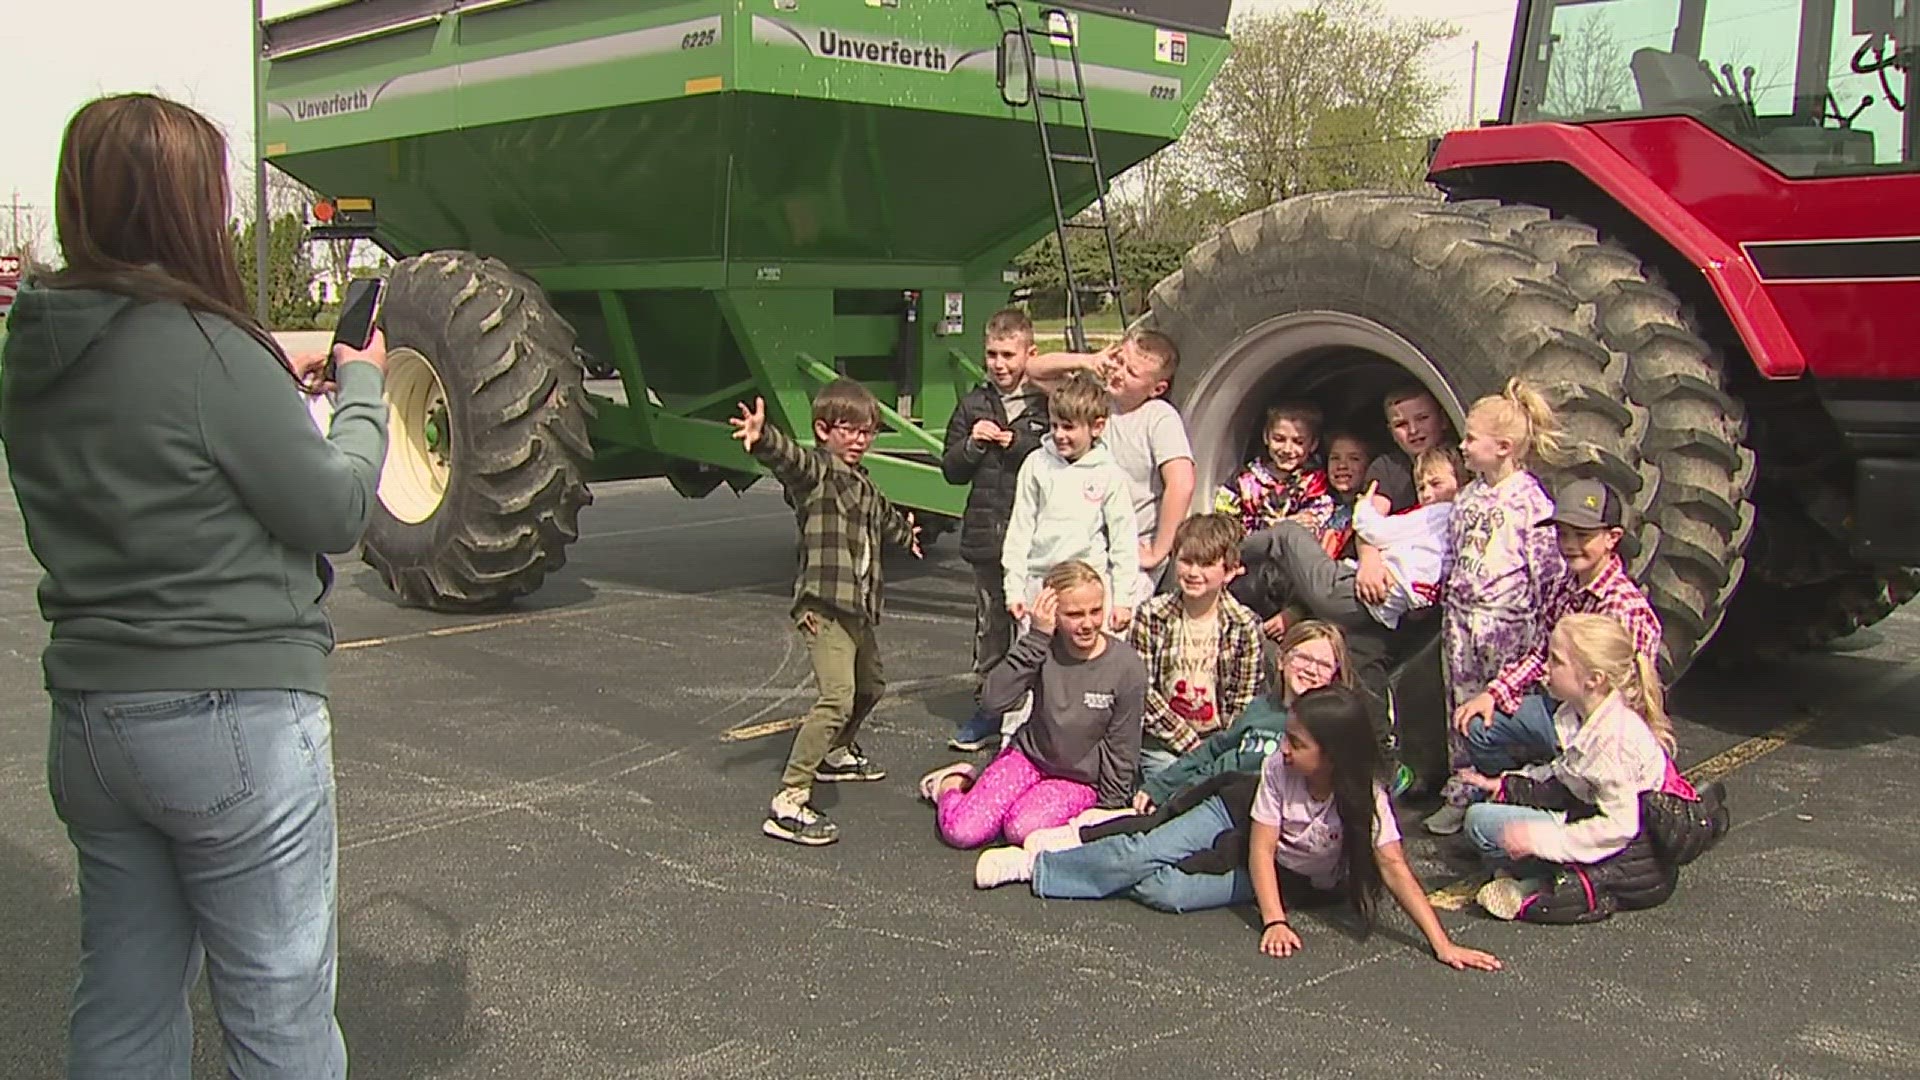 The kids had classroom lessons, farm equipment demonstrations and even a petting zoo.